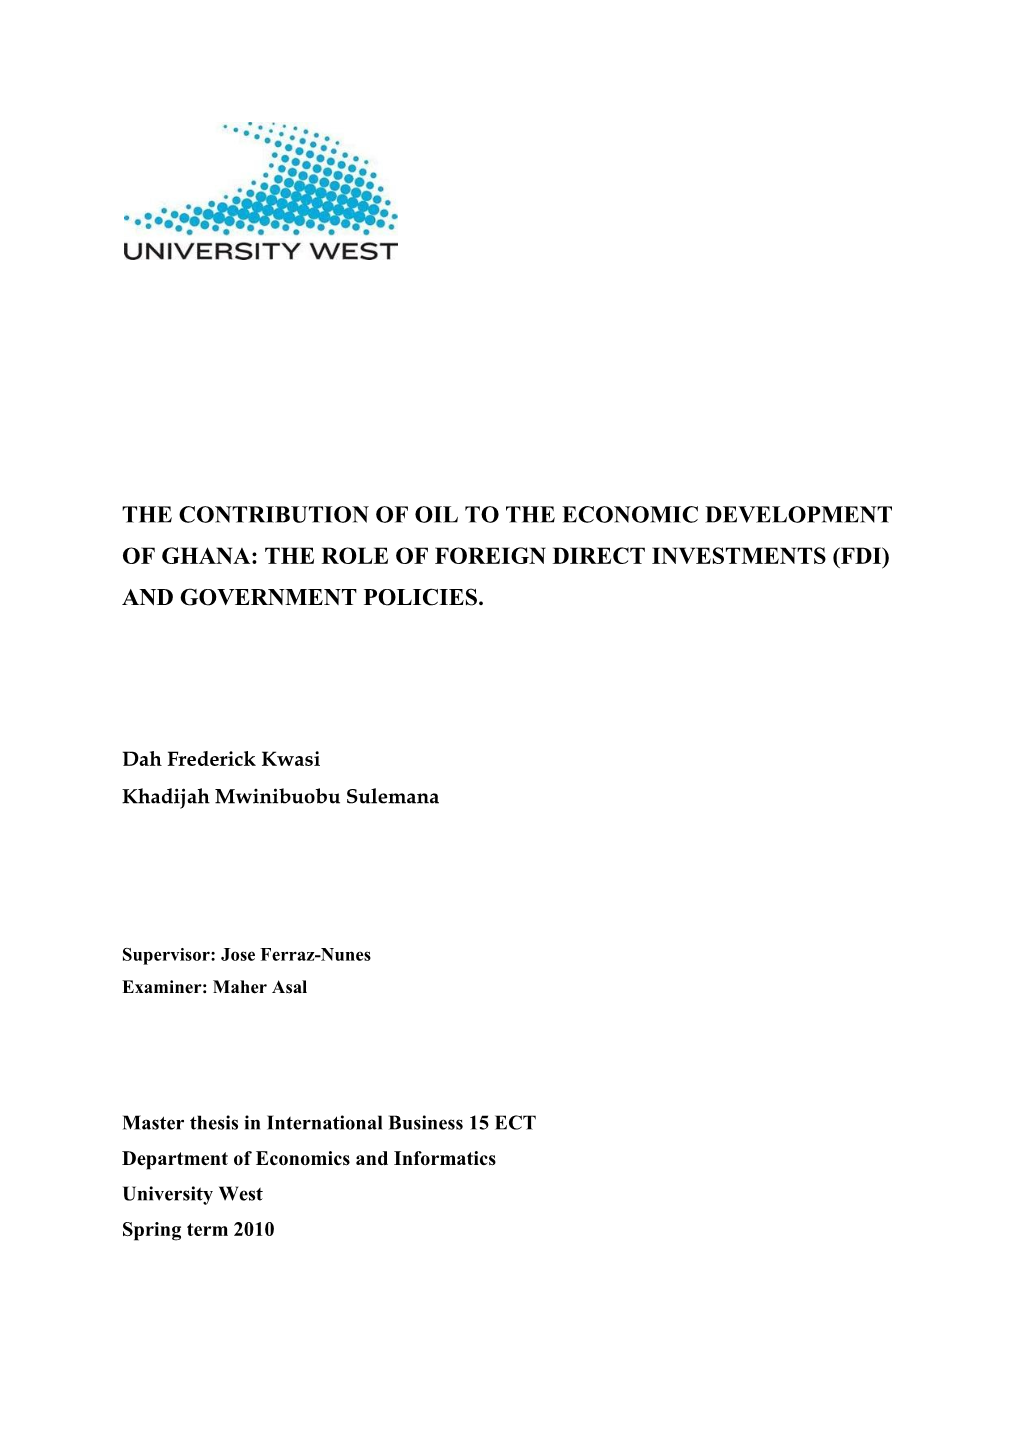 The Contribution of Oil to the Economic Development of Ghana: the Role of Foreign Direct Investments (Fdi) and Government Policies